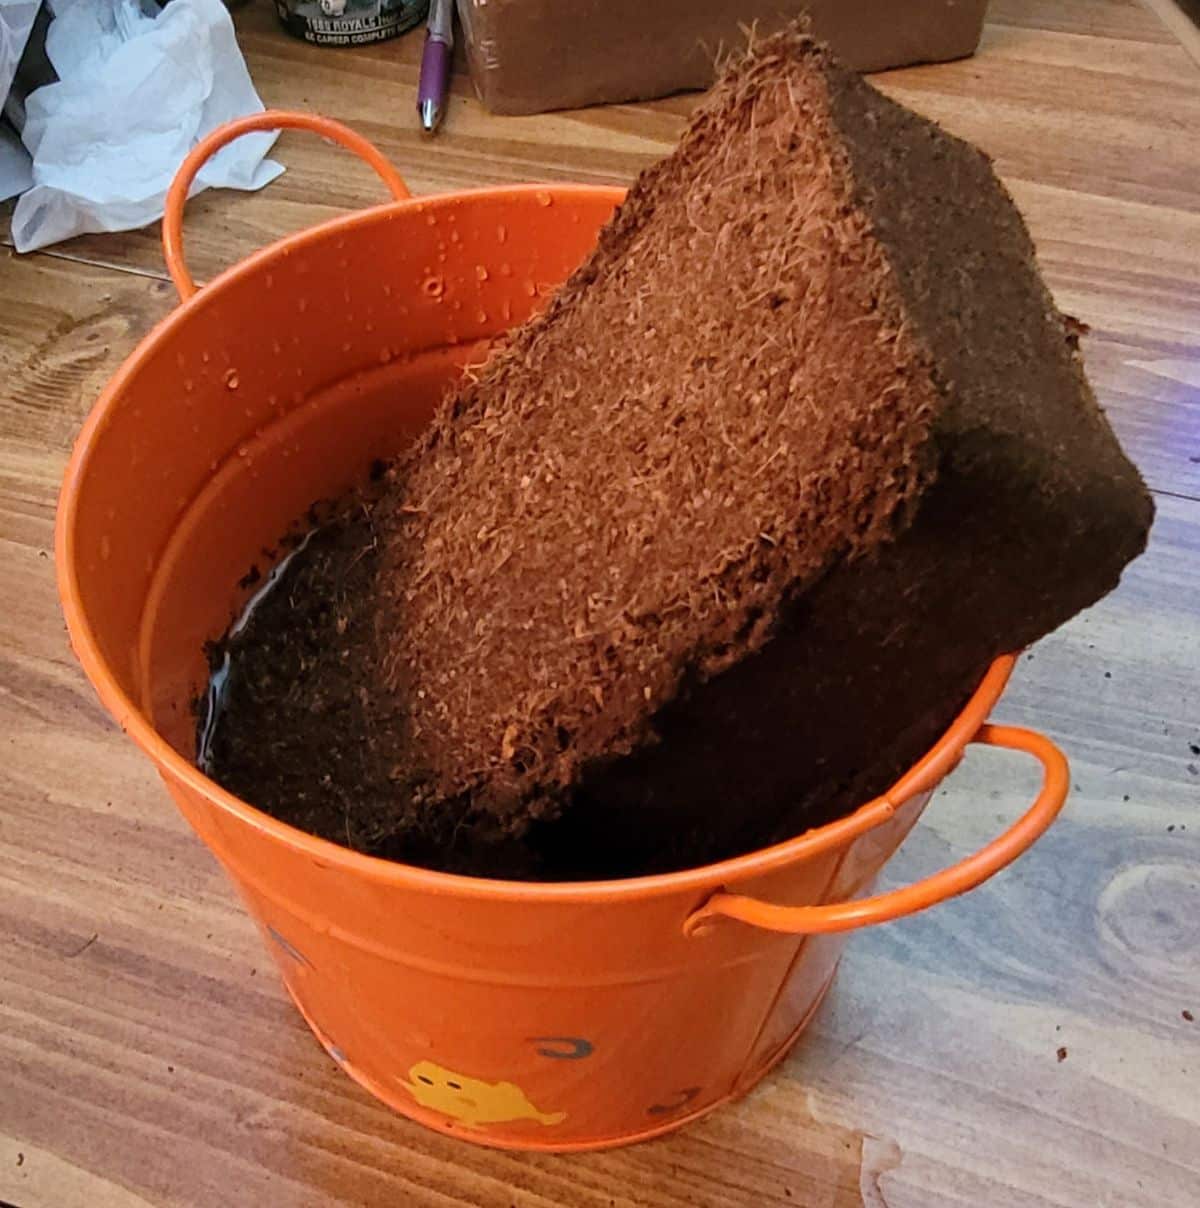 Soaking coco coir in water